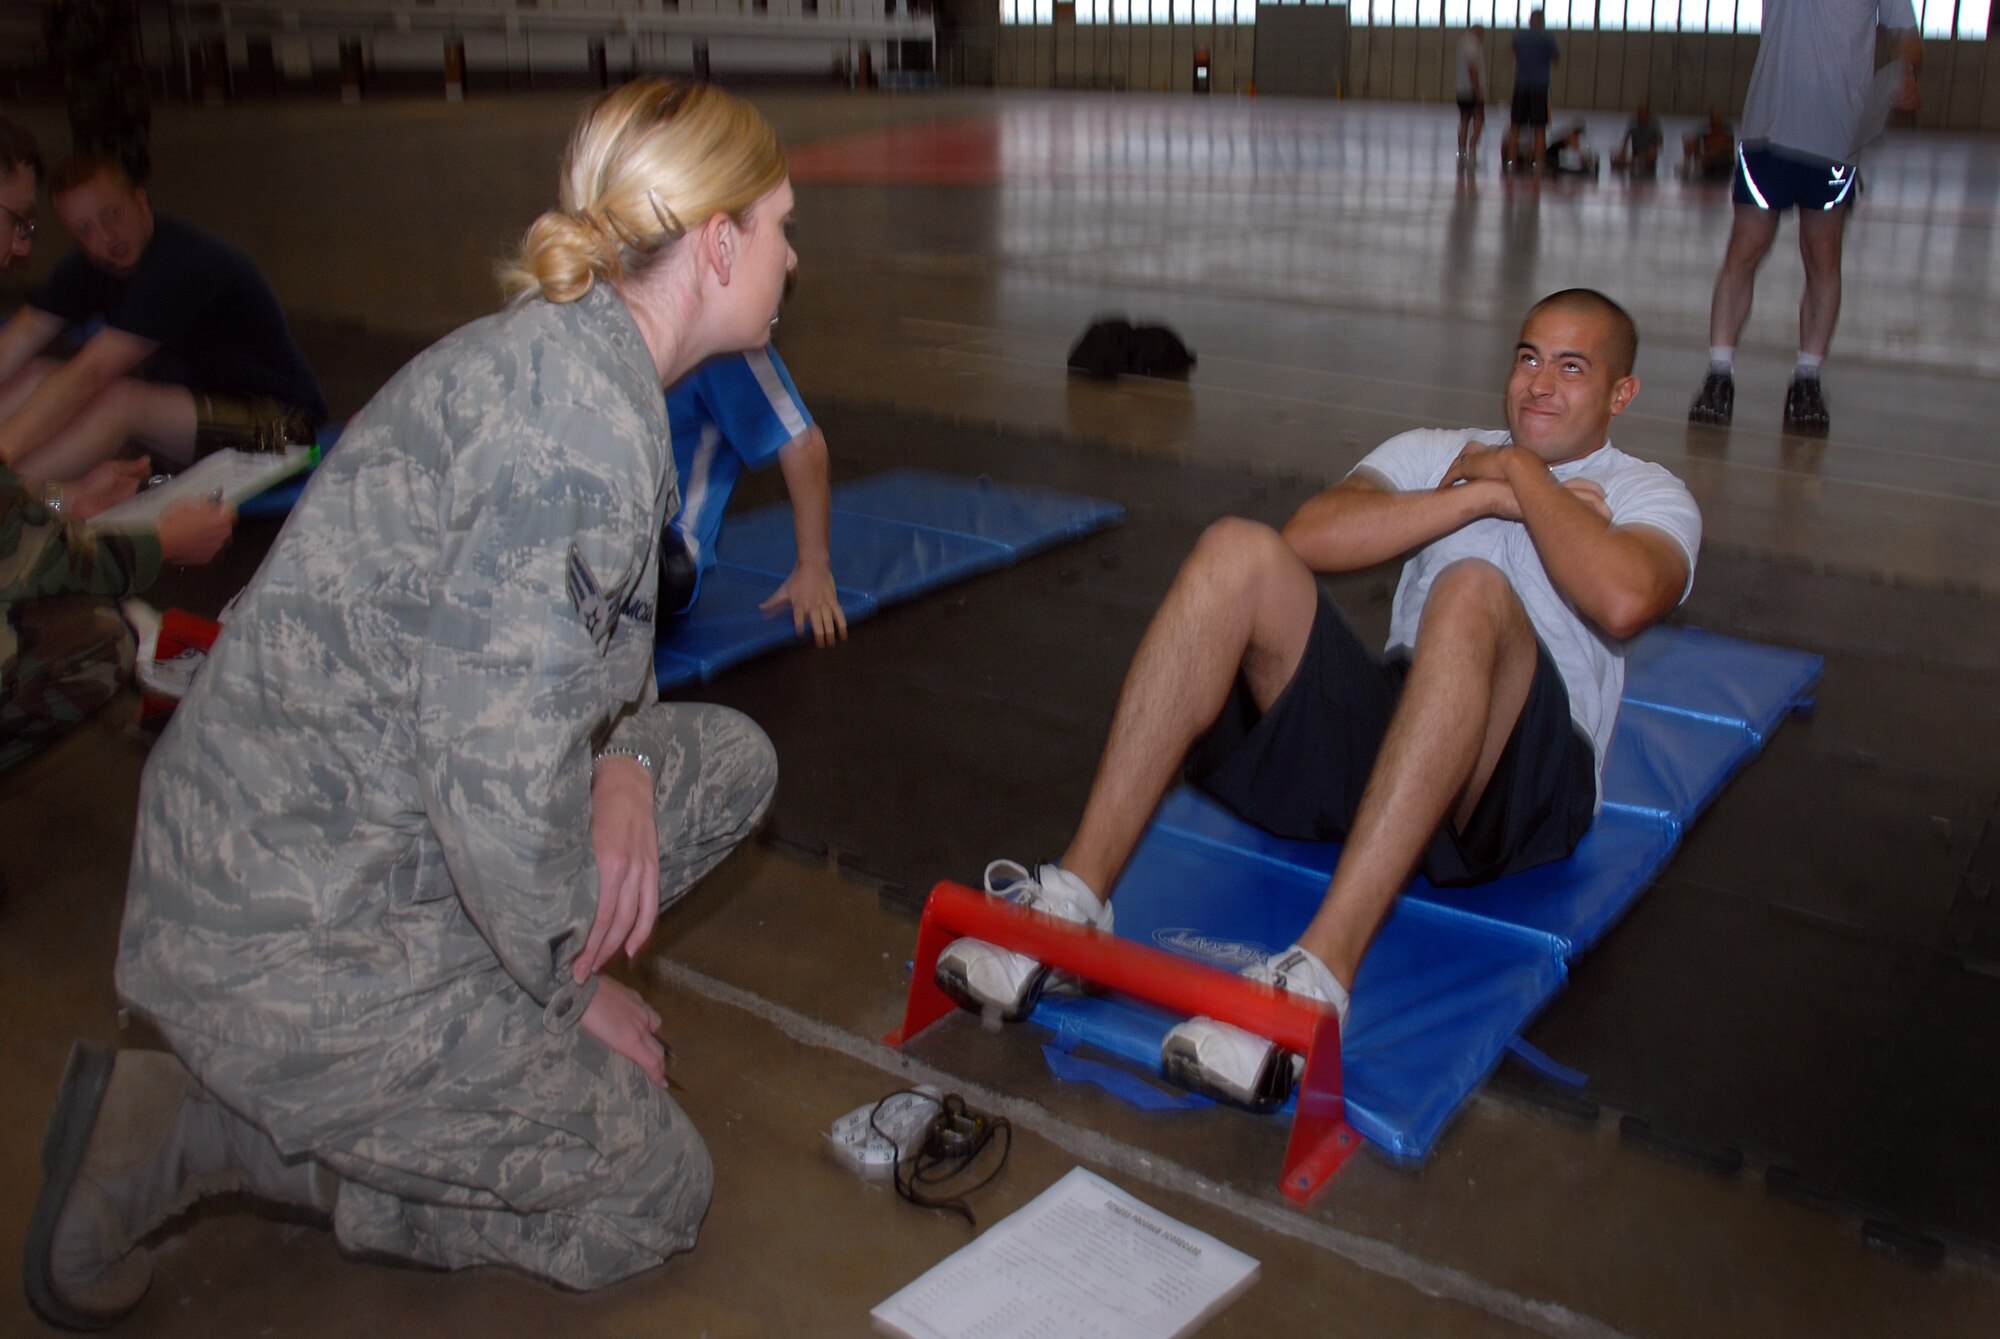 Senior Airman Hannah McGuire with the 28th Medical Group counts as Airman First Class Alex Carmona of the 137th Space Warning Squadron completes his sit-ups during his annual physical training (PT) June 10, 2009, Ellsworth Air Force Base, South Dakota.  Carmona along with other members of the 137th SWS located in Greeley Colorado, are participating in several training events to include there PT test while at Ellsworth AFB this week to further enhance their one of a kind worldwide capable mission as a missile warning , space launch and detection mobile unit. (U.S Air Force photo by: Tech. Sgt. Wolfram M. Stumpf)